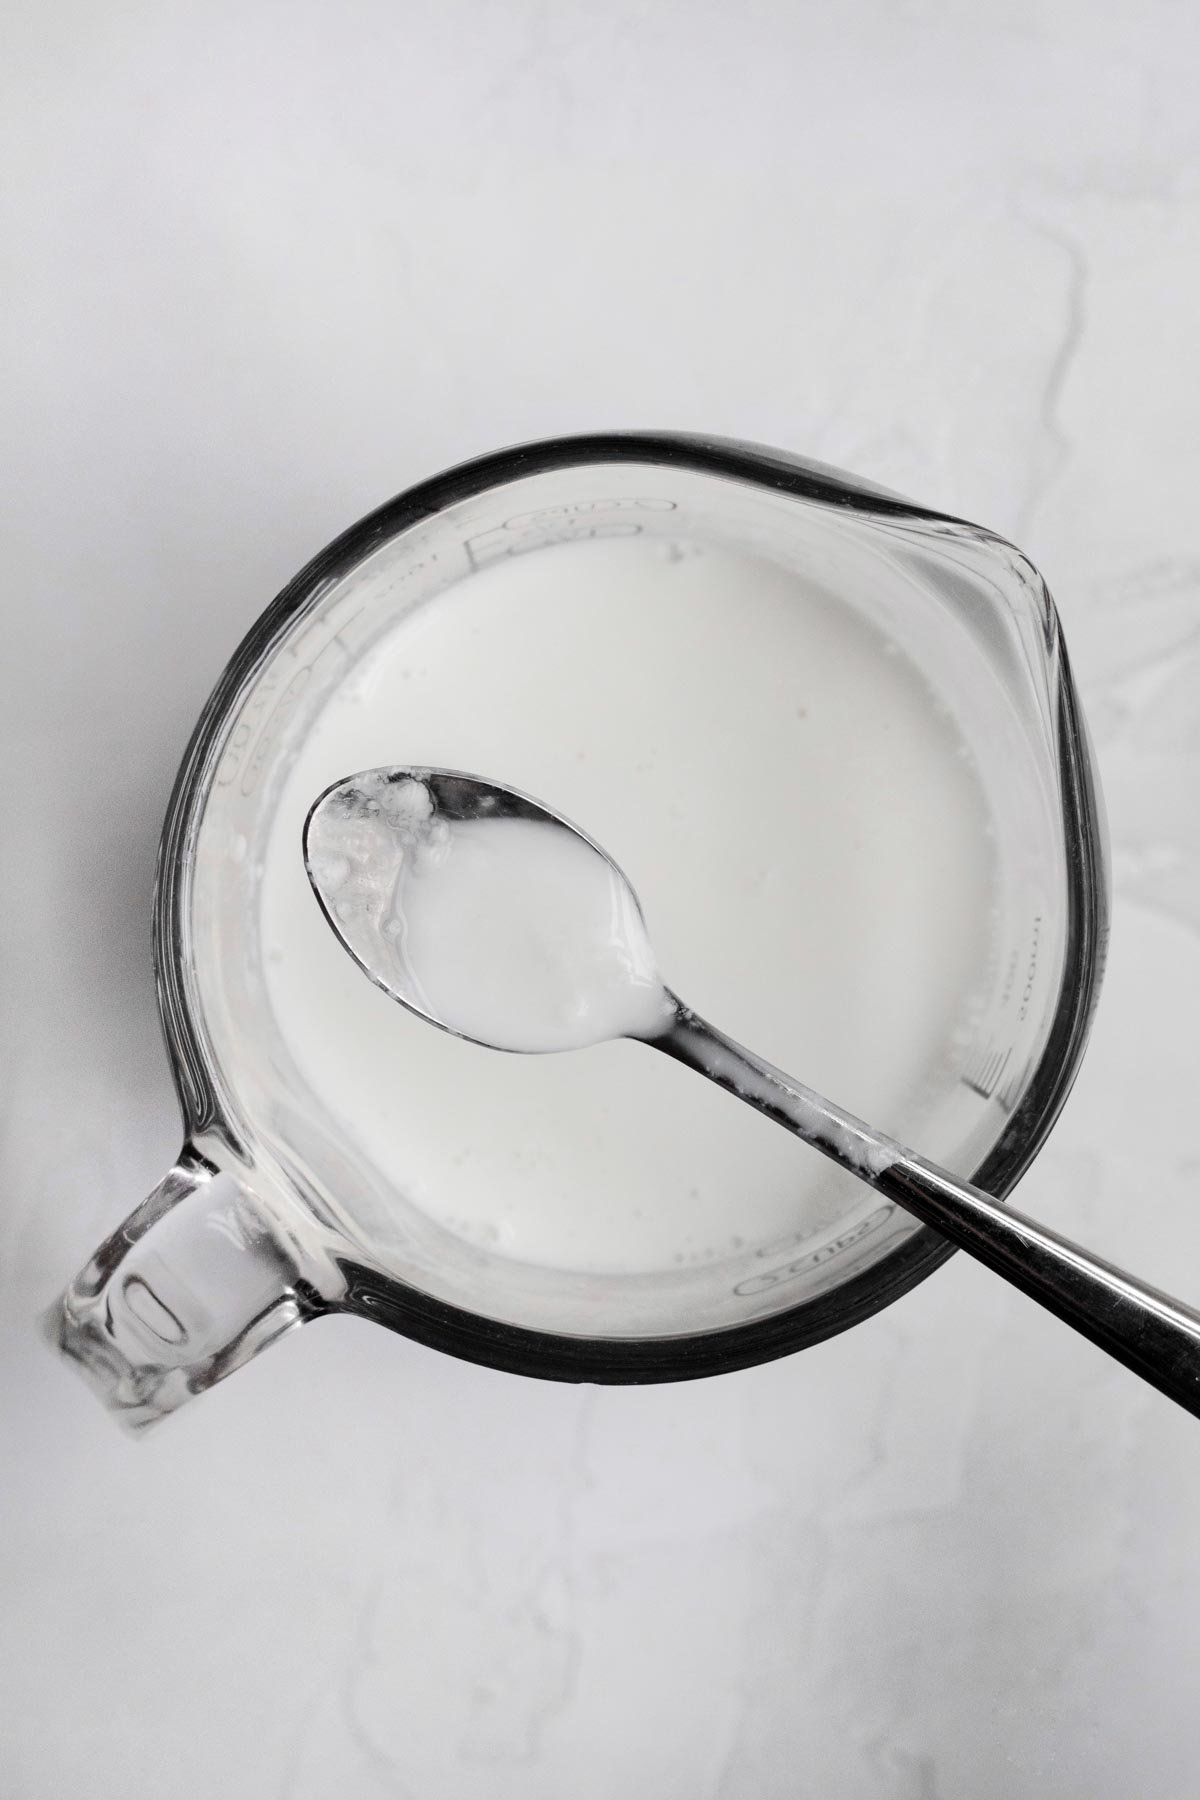 Milk and white vinegar mixture in a measuring cup.